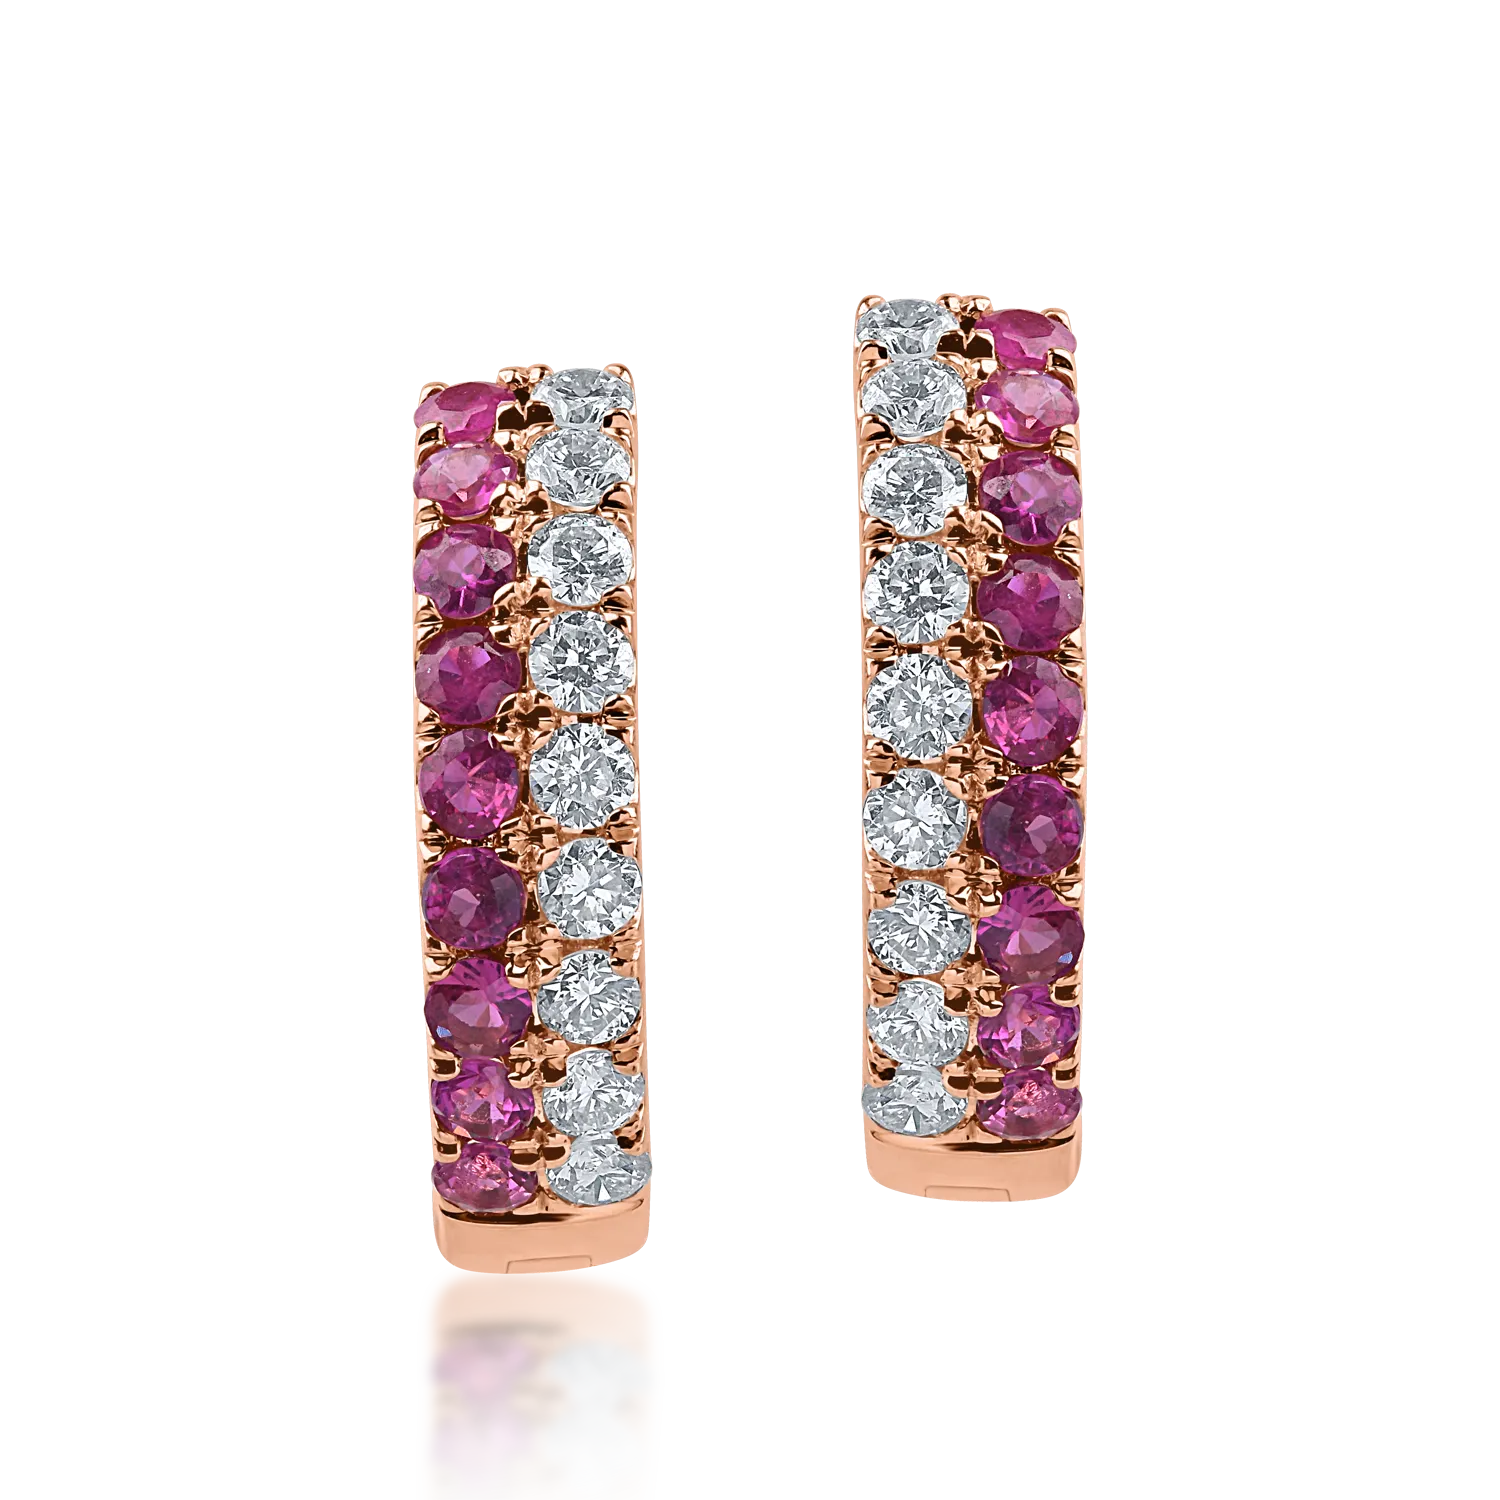 Rose gold earrings with 0.267ct rubies and 0.211ct diamonds